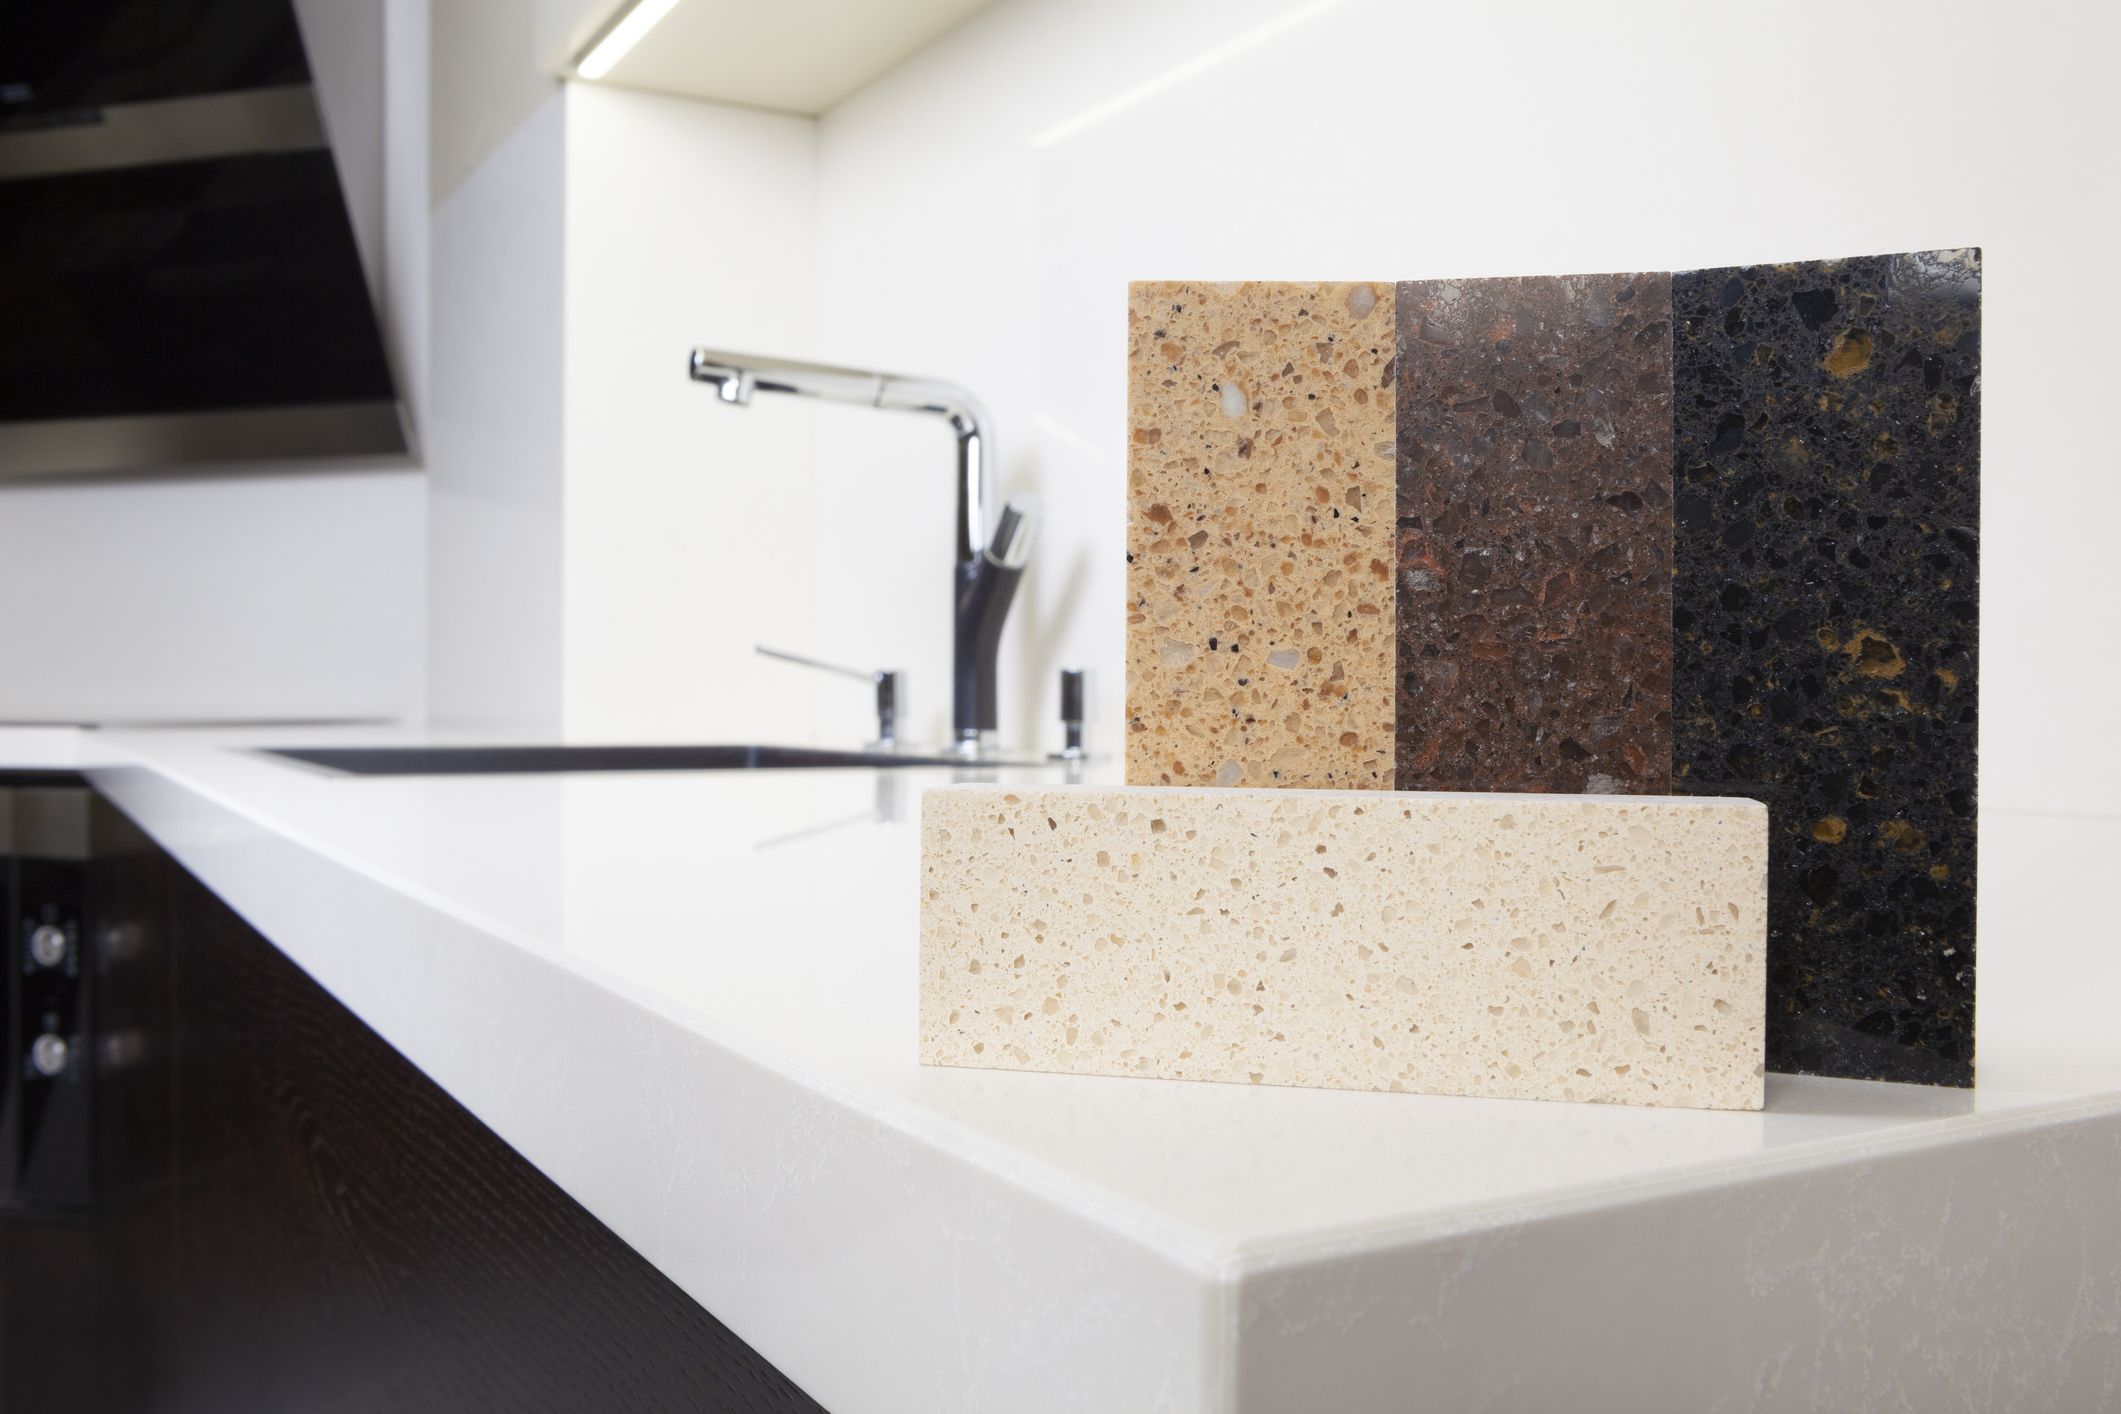 What Is The Best Material For Countertops In The Kitchen